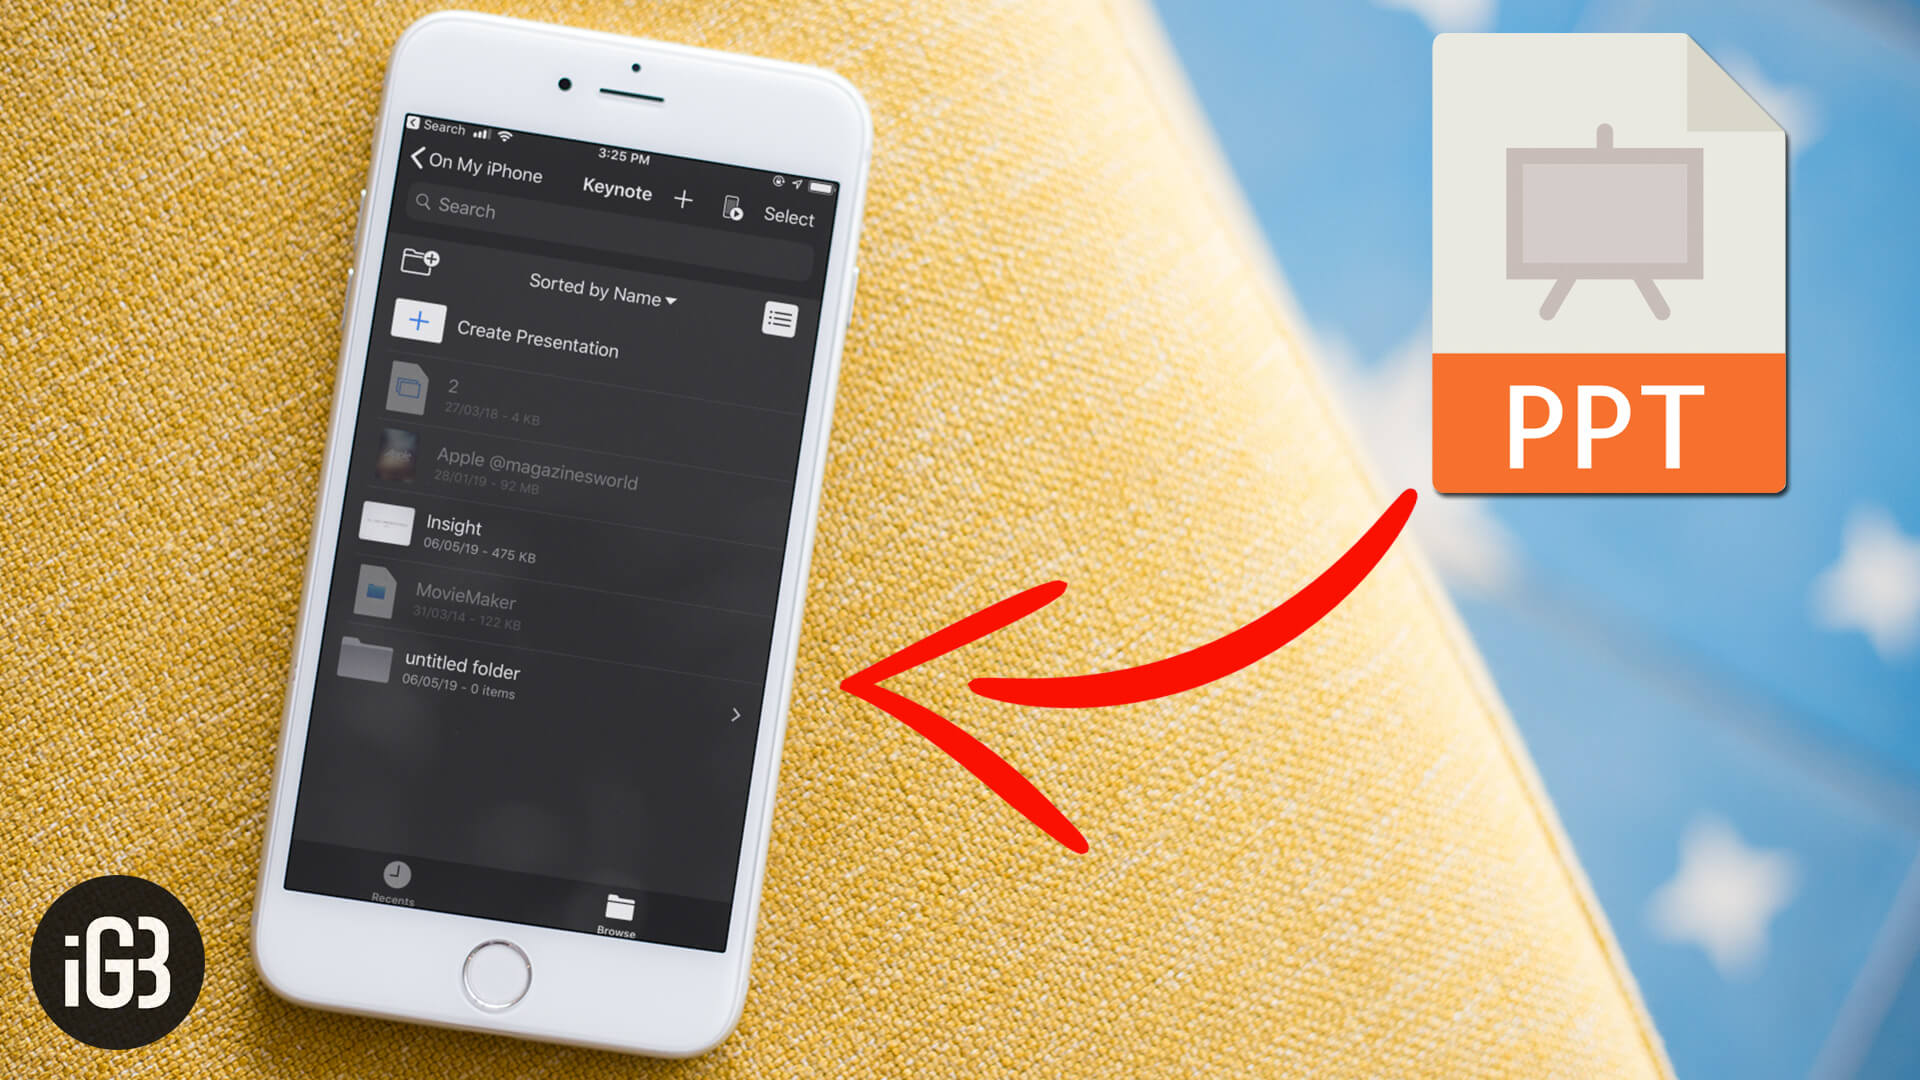 How to import ppt files to your iphone and ipad